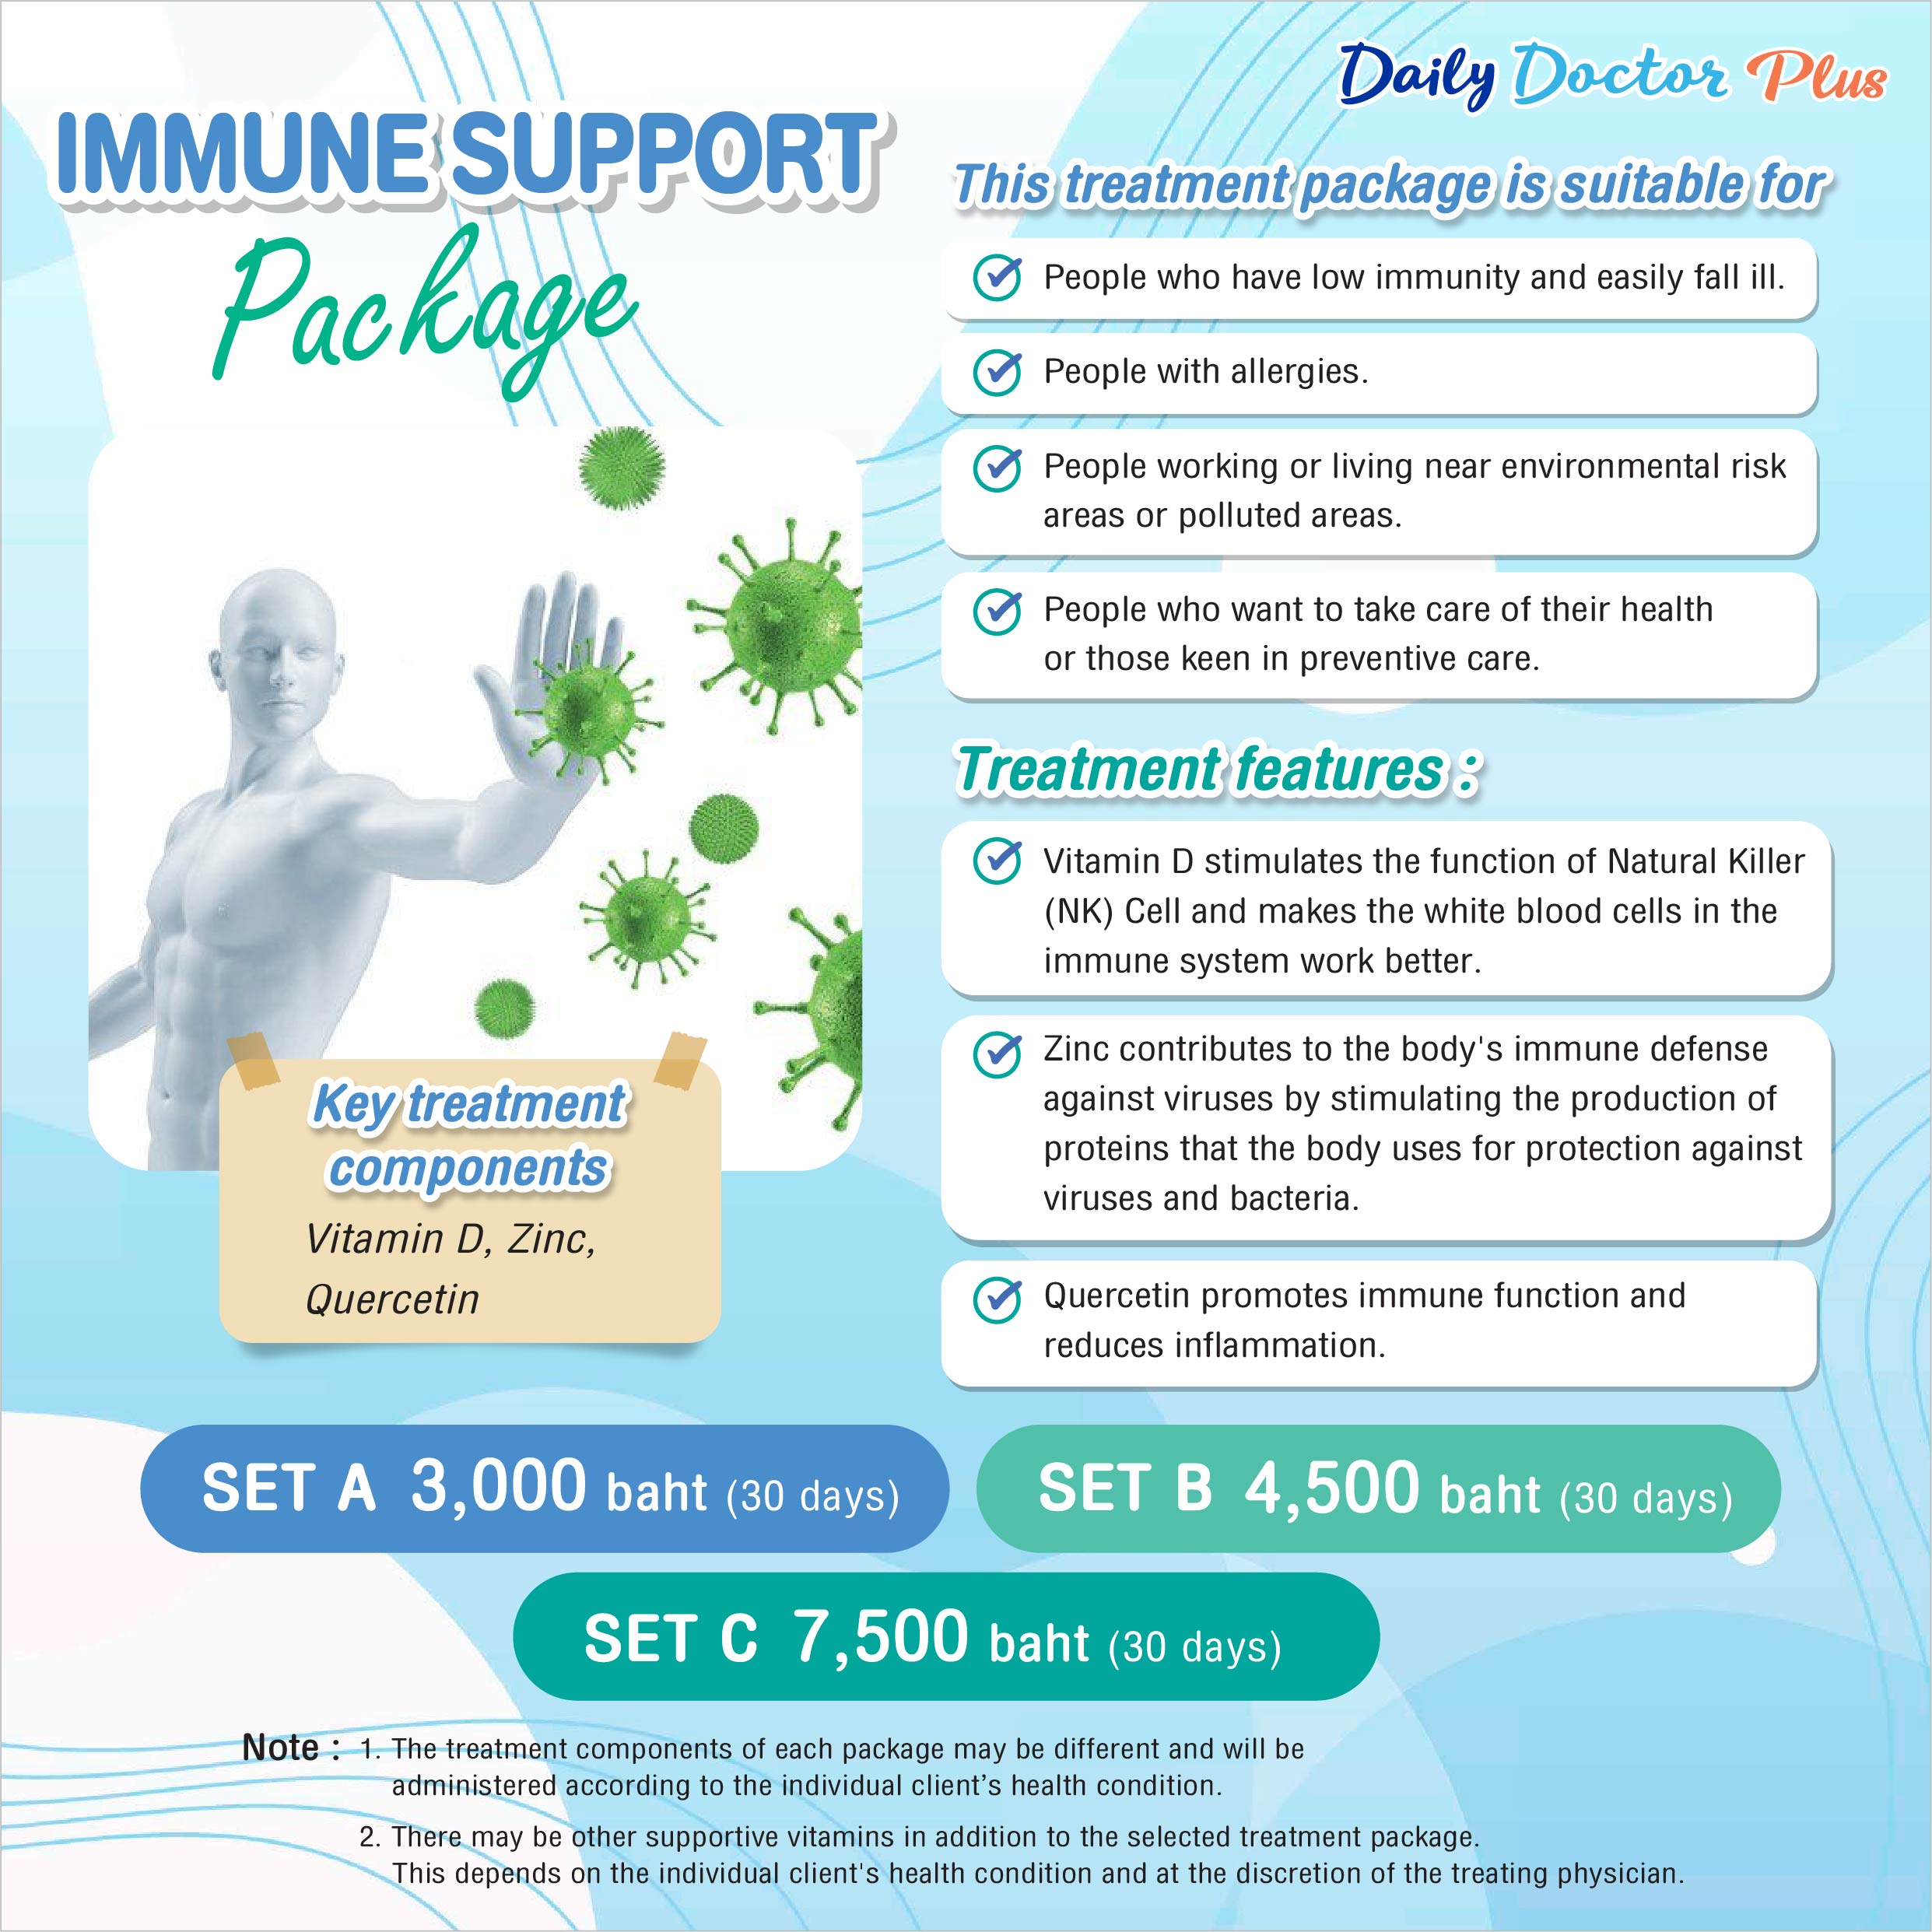 Daily Doctor Plus : Immune Support Package